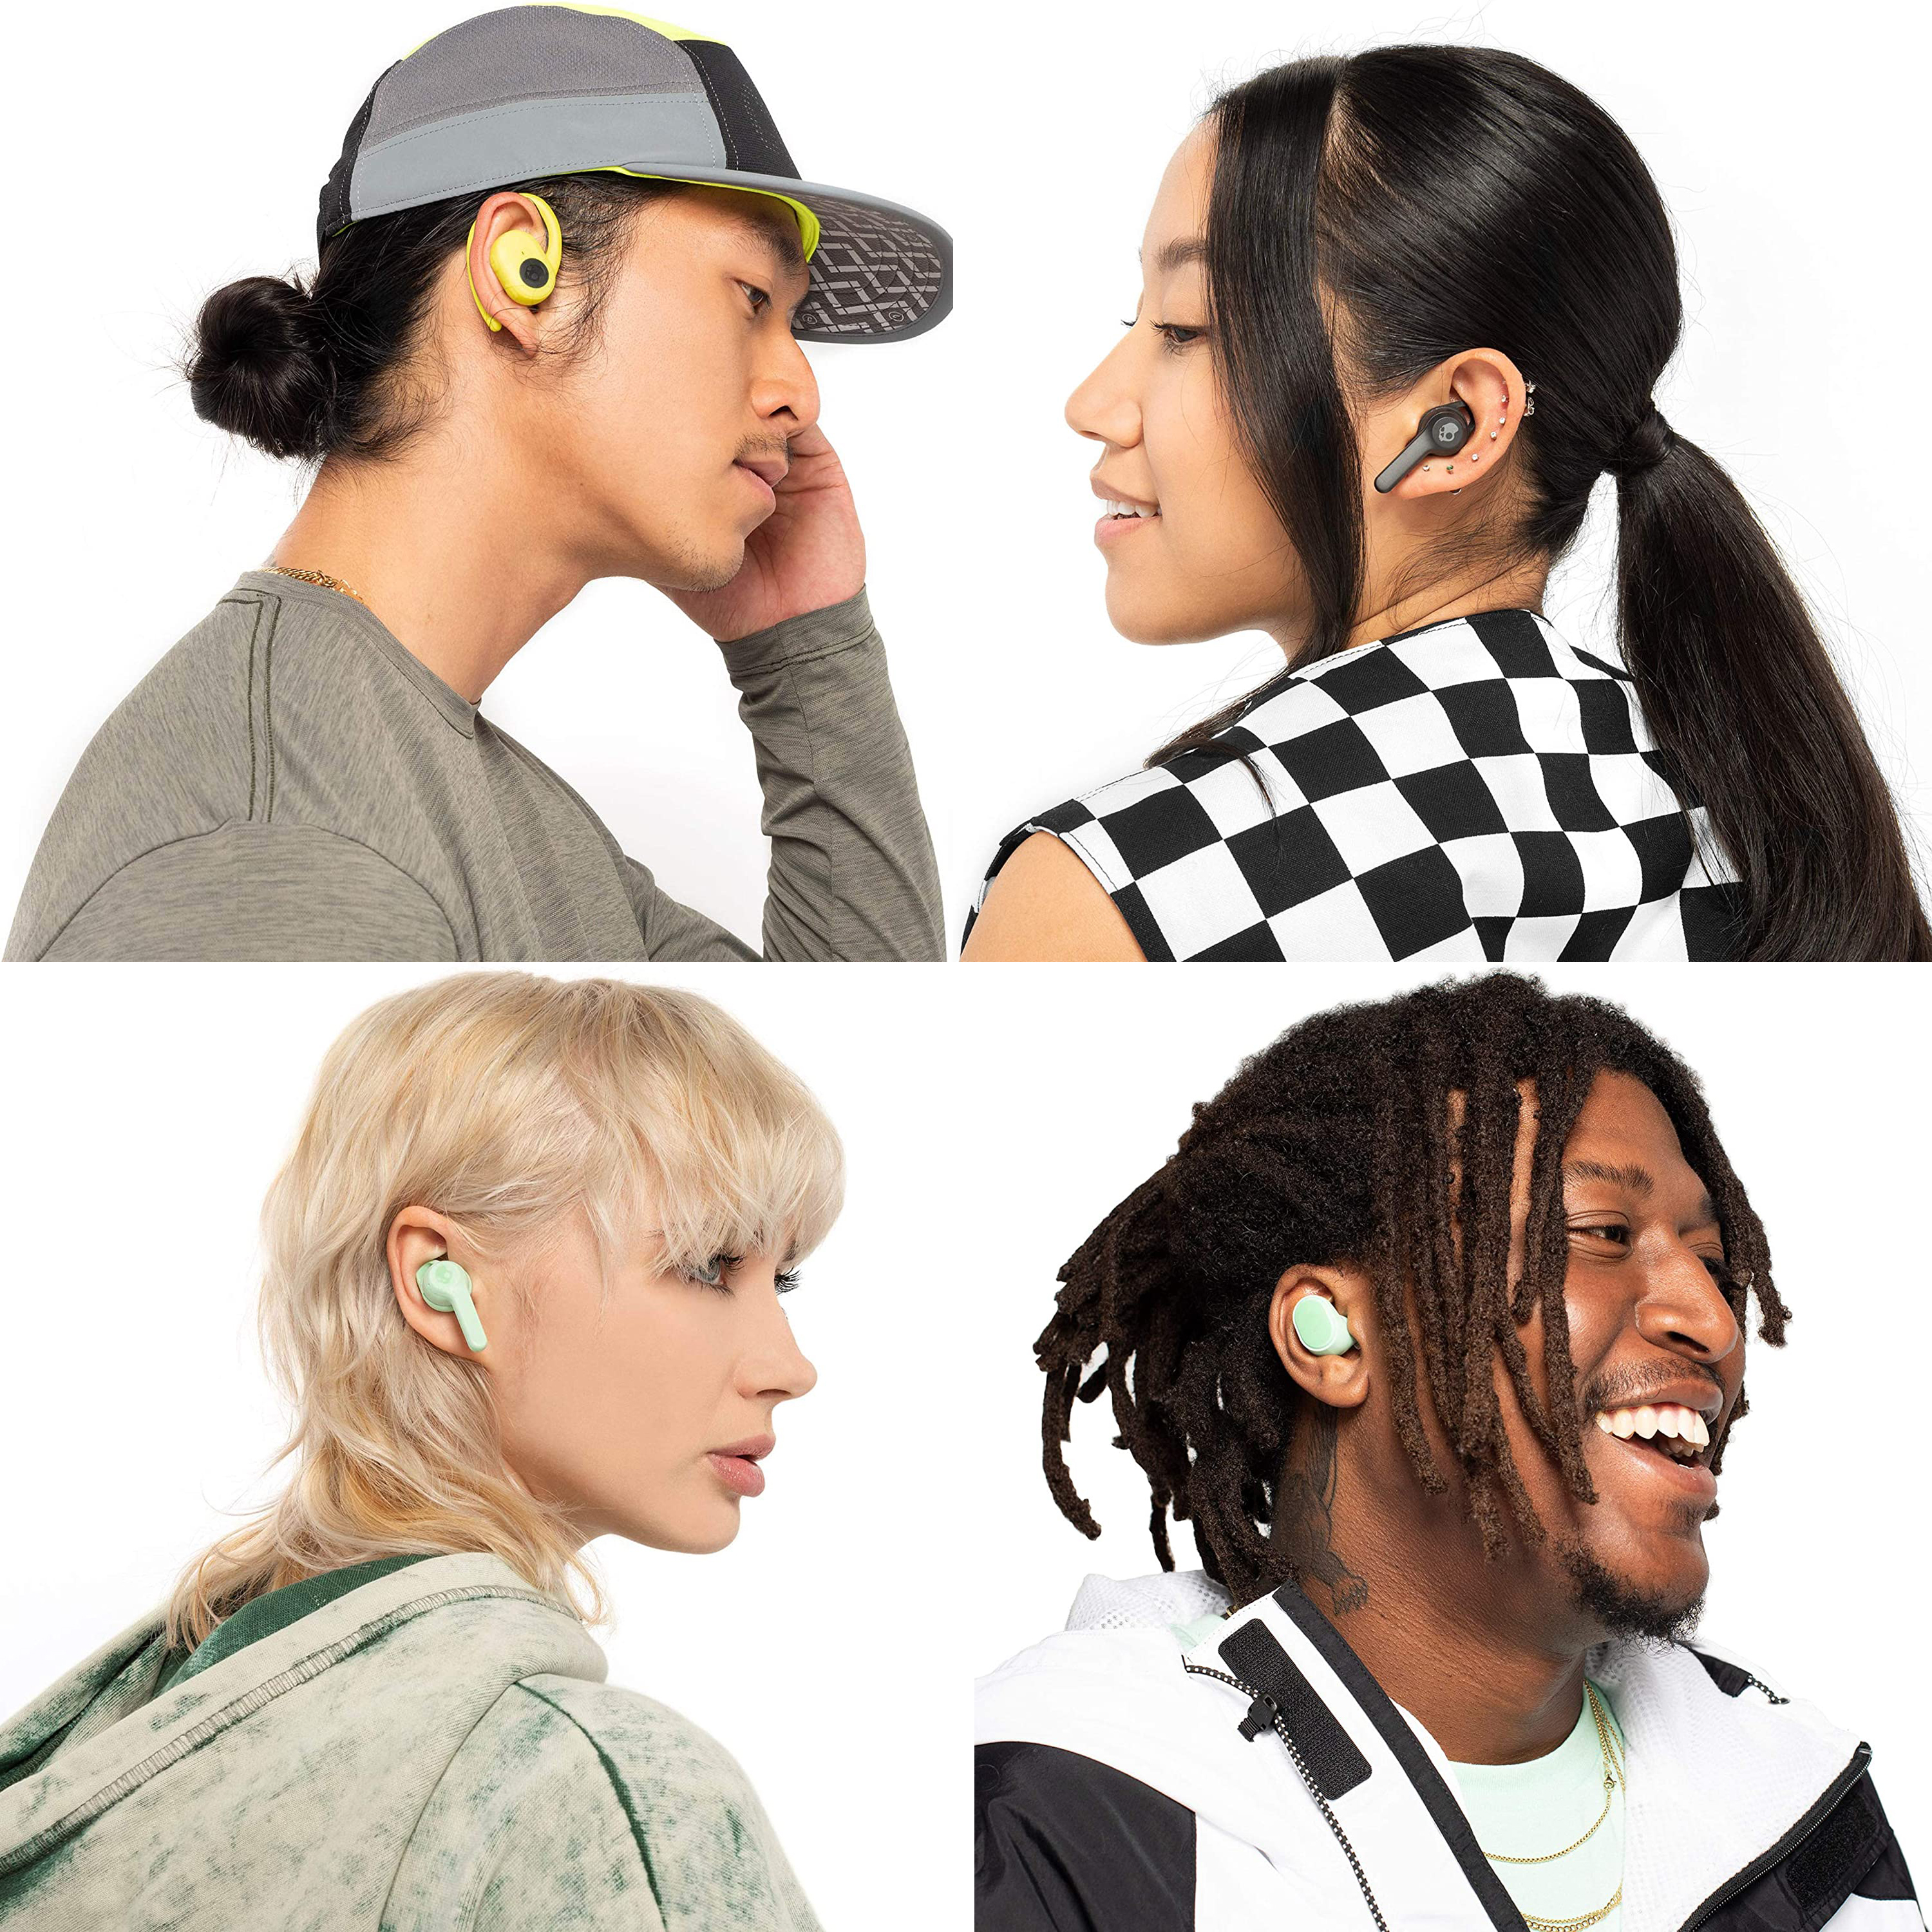 Skullcandy update their earbuds range with Tile tracking functionality